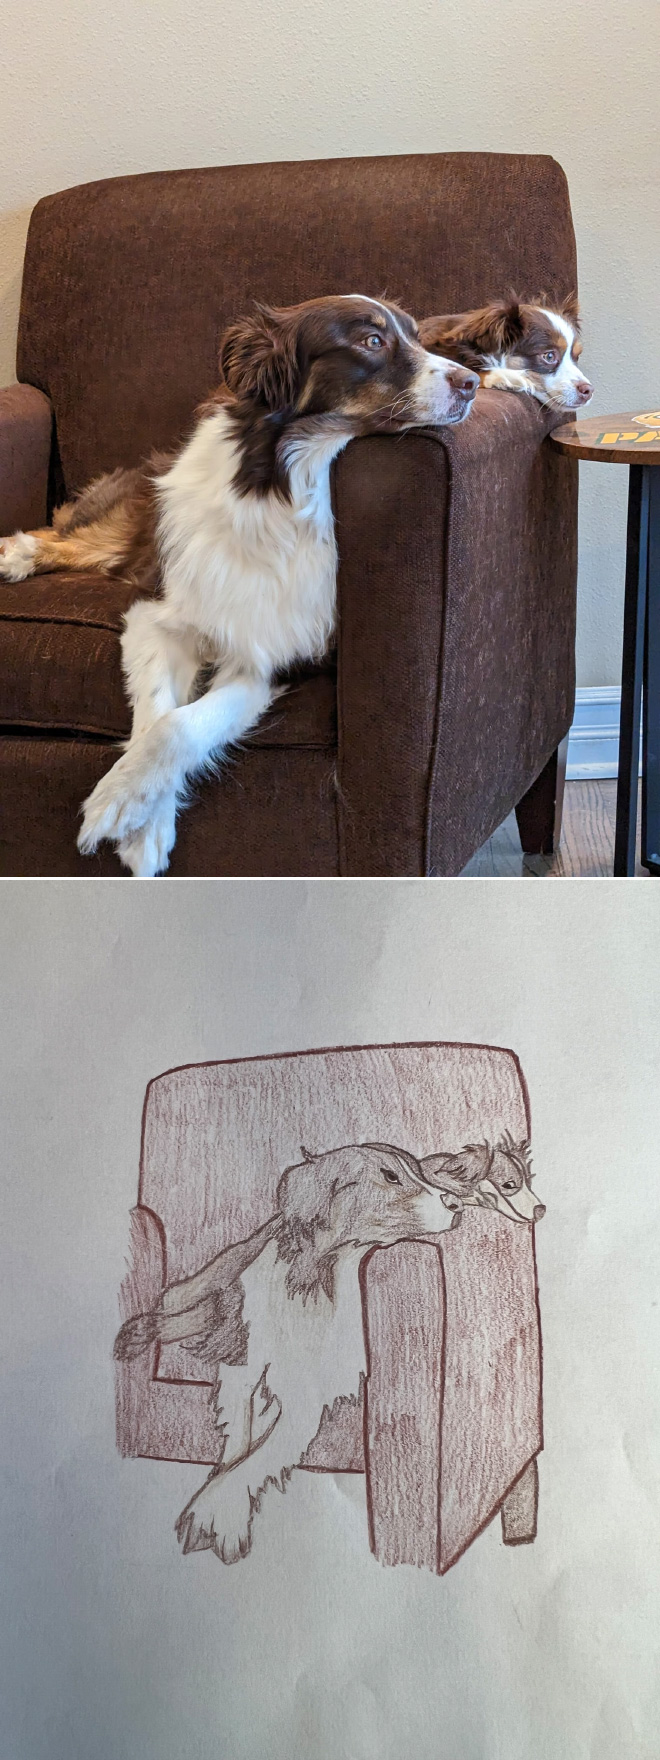 Poorly drawn dogs.